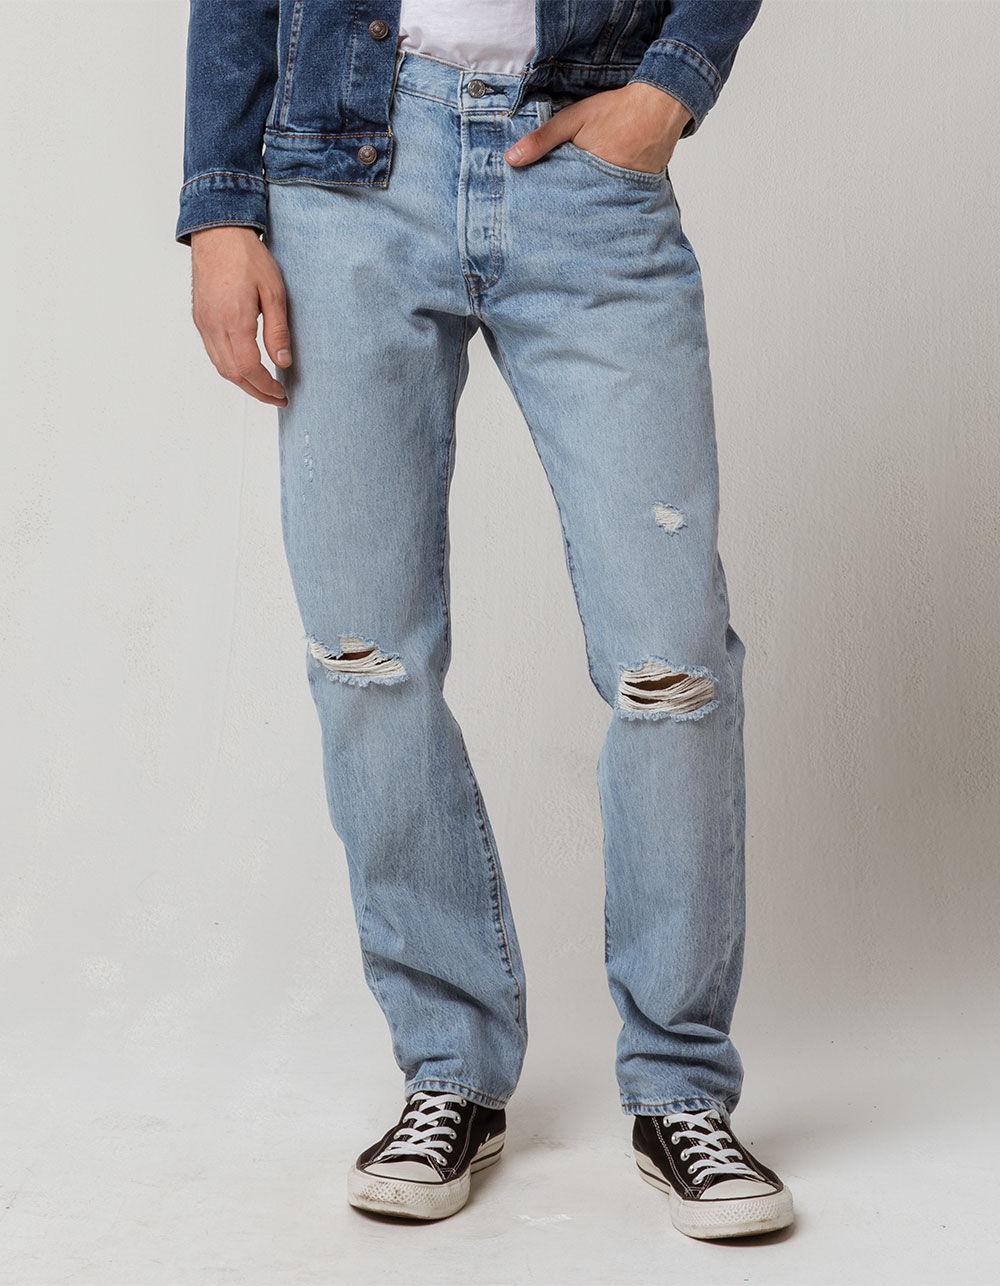 ripped jeans levis mens